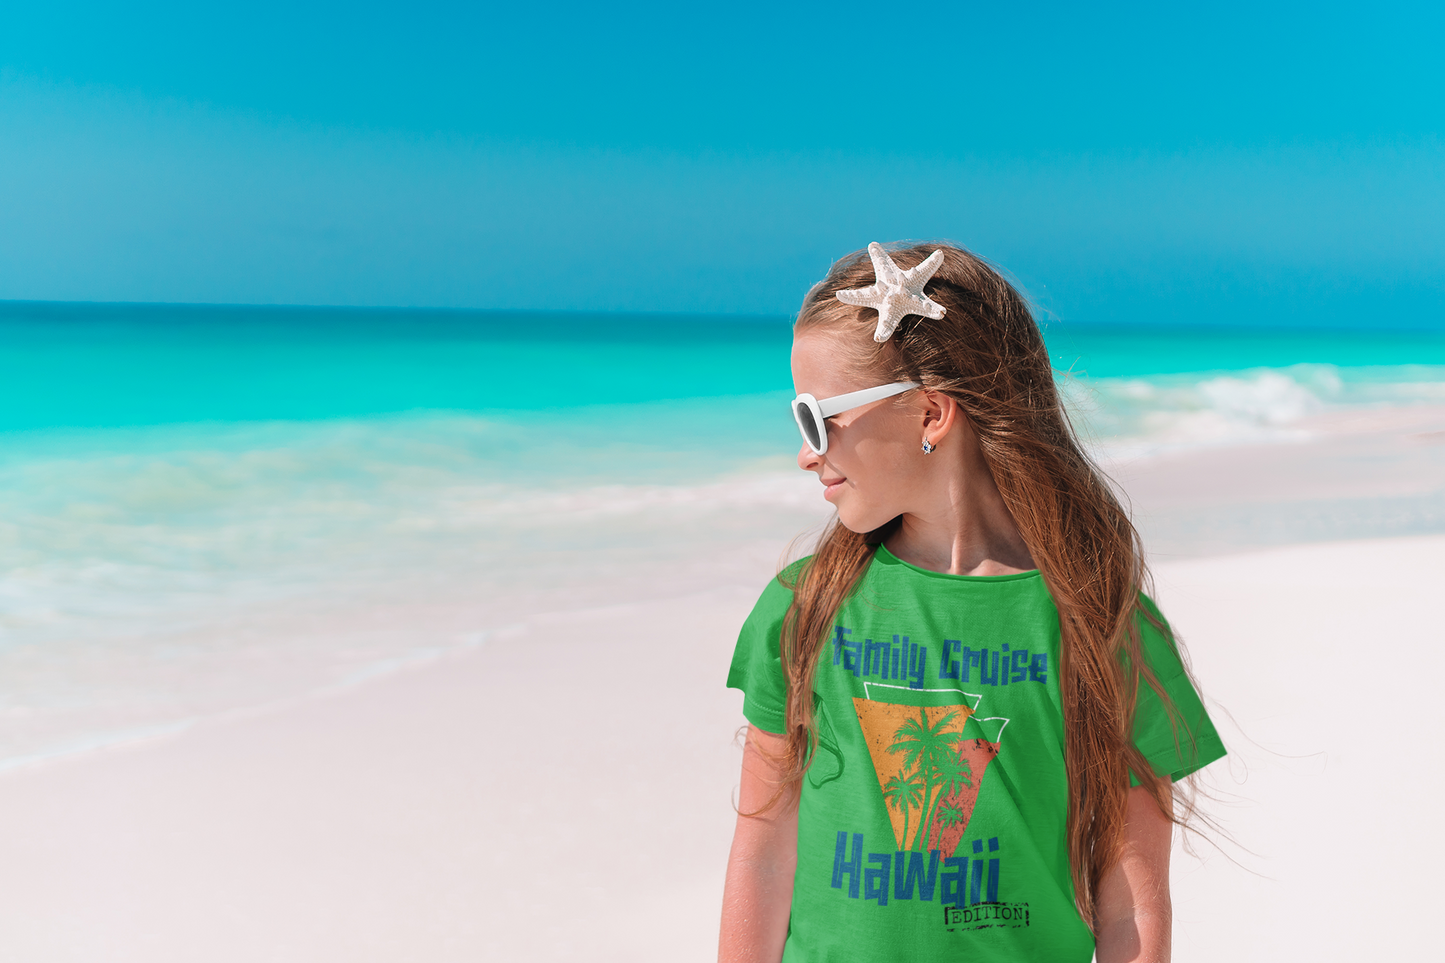 "Family Cruise Hawaii Edition" Kids T-Shirt – The Perfect Shirt for Your Family Hawaiian Adventure!